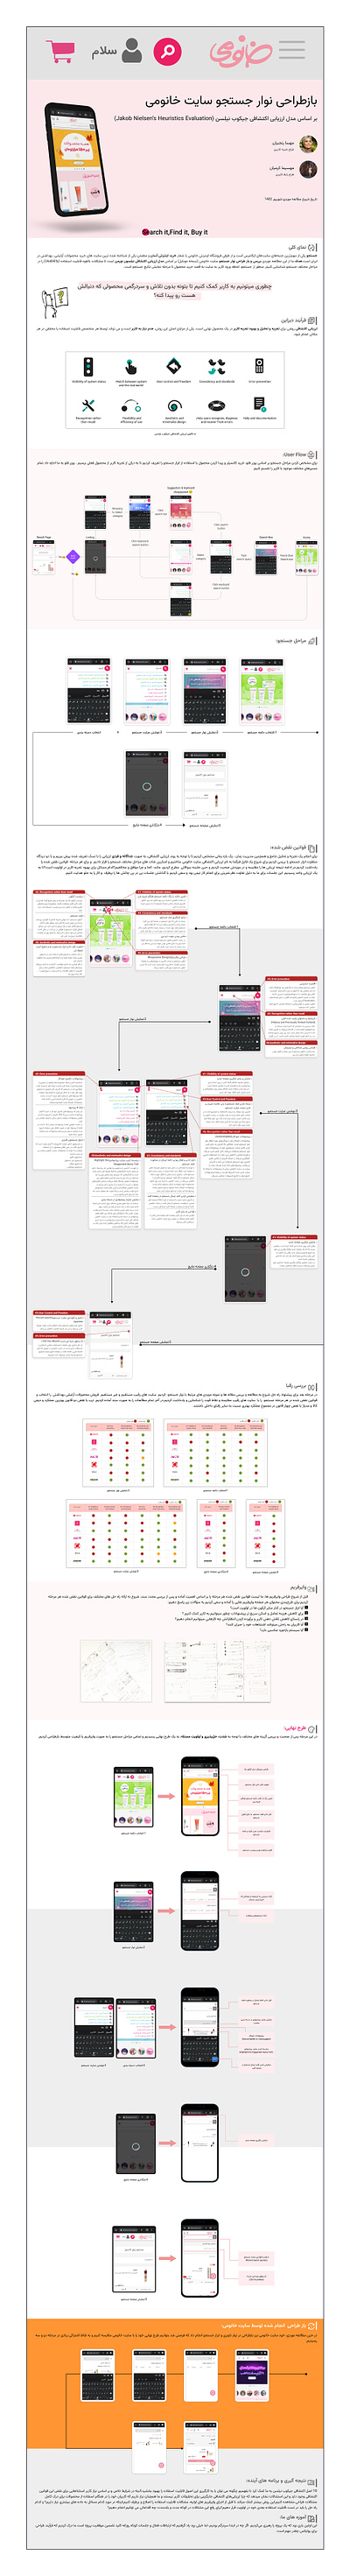 UX Case Study, Improving the Search Experience of Khanumi app heuristic evaluation redesign ui ux